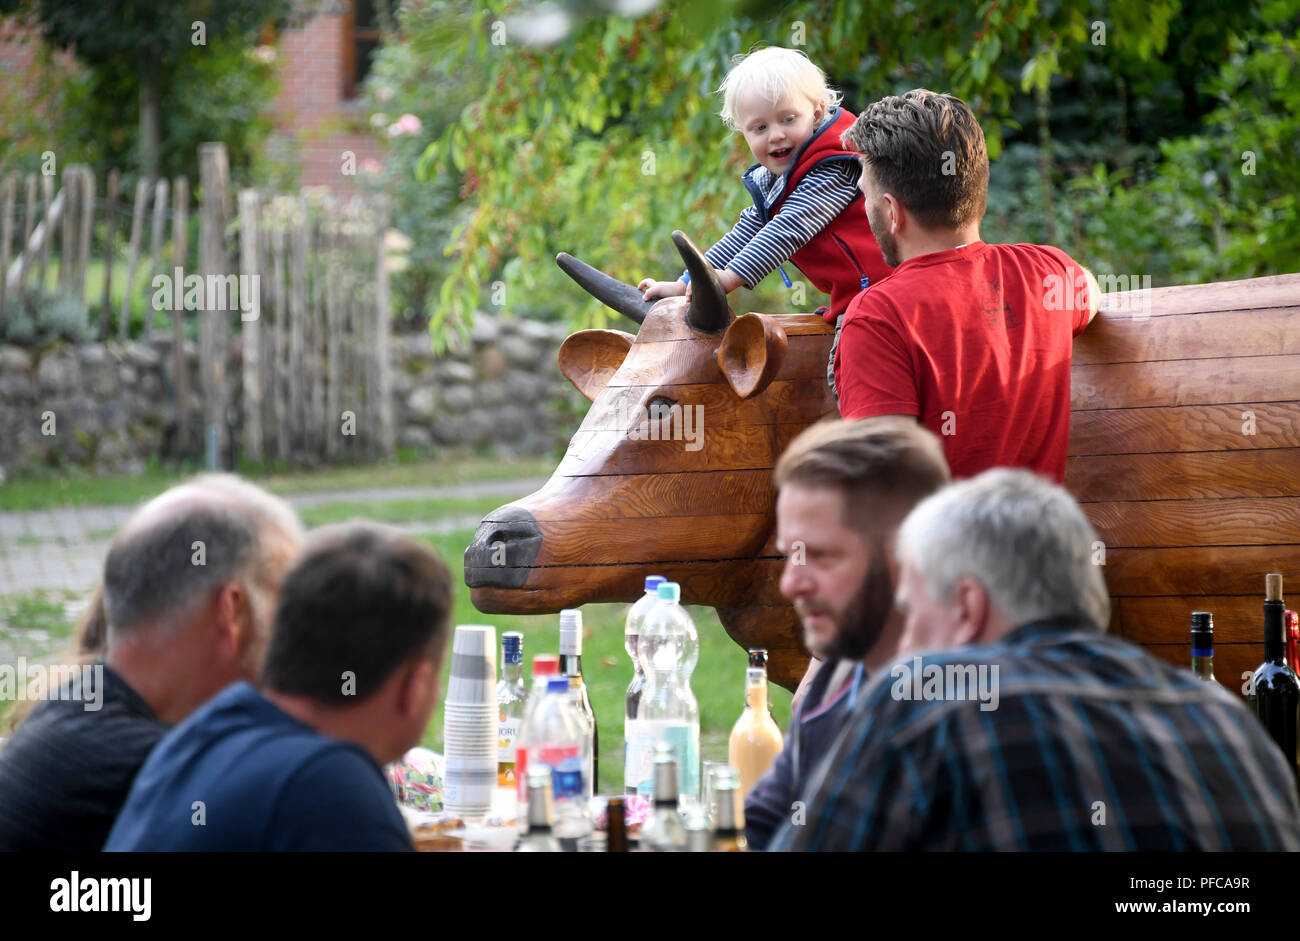 Aukrug-Homfeld, Germany. 19th Aug, 2018. The wooden cow 'Gerda Muh' stands behind visitors of a neighbourhood meeting. An anonymous artist created the wooden cow, since Whitsun it has appeared in changing gardens in the district of Homfeld. With this event, the initiator wants to stimulate the discussion about agriculture and the community feeling of the villagers. Credit: Carsten Rehder/dpa/Alamy Live News Stock Photo